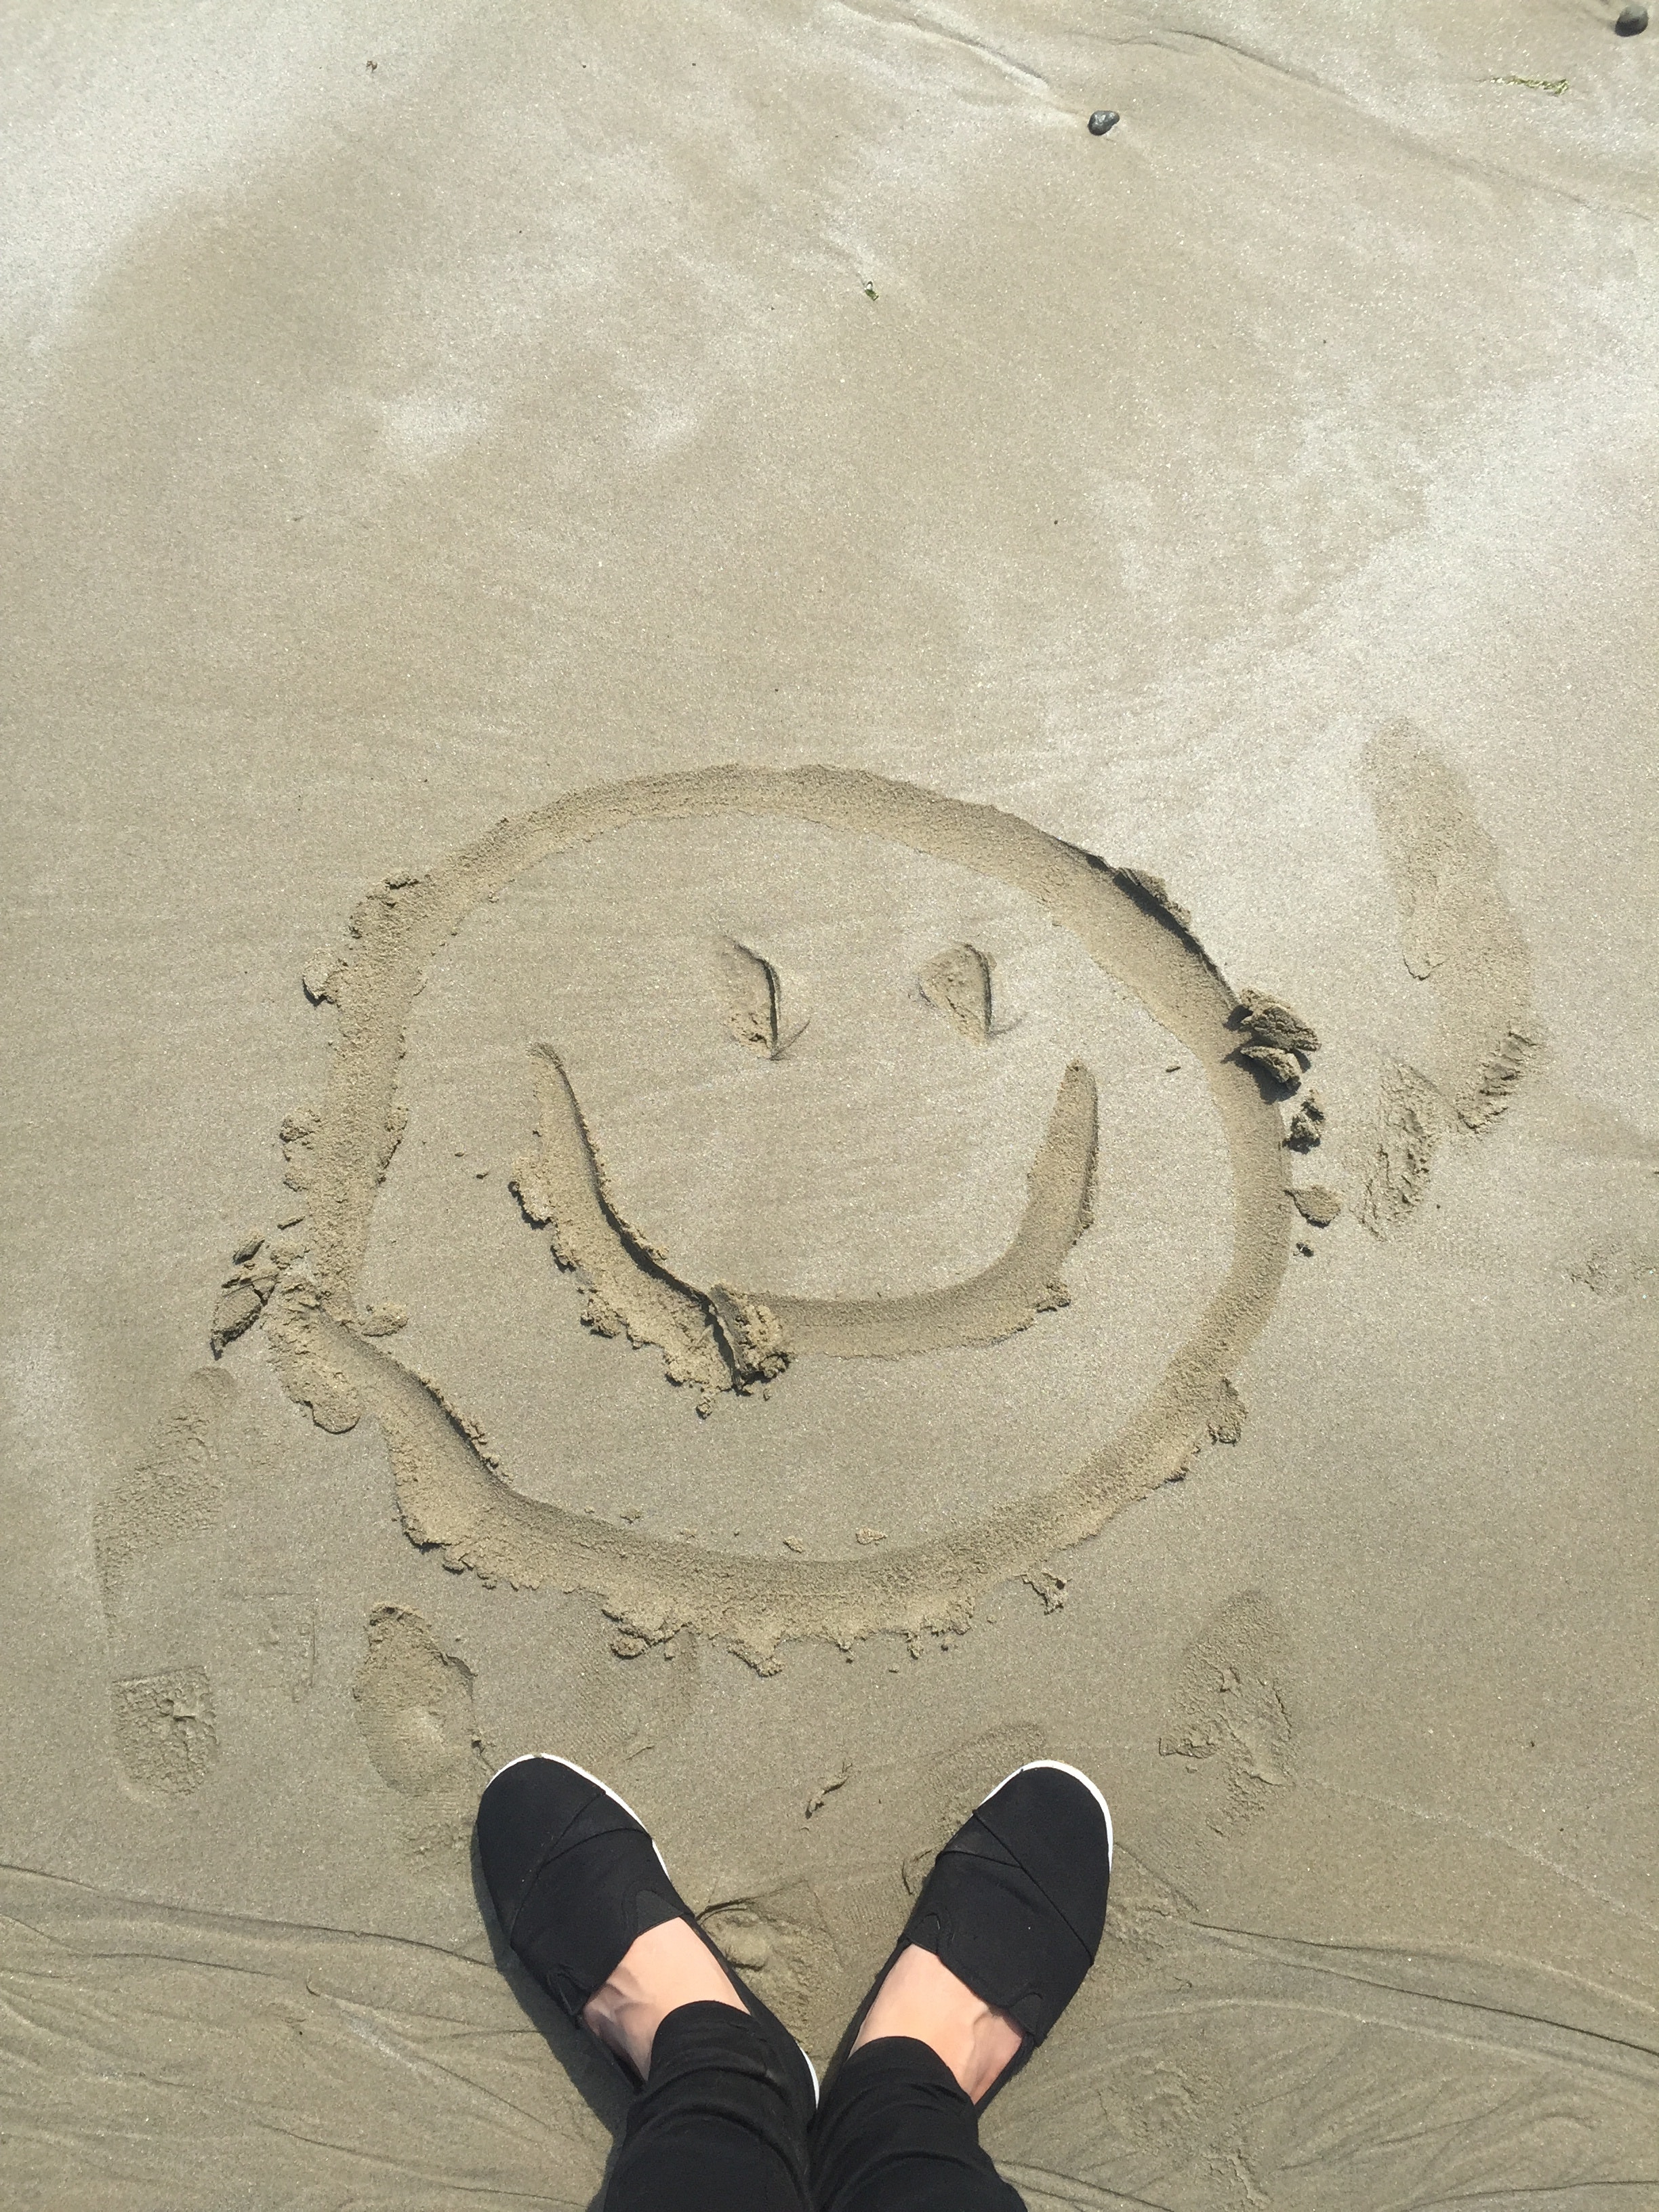 Smiley drawing on sand photo